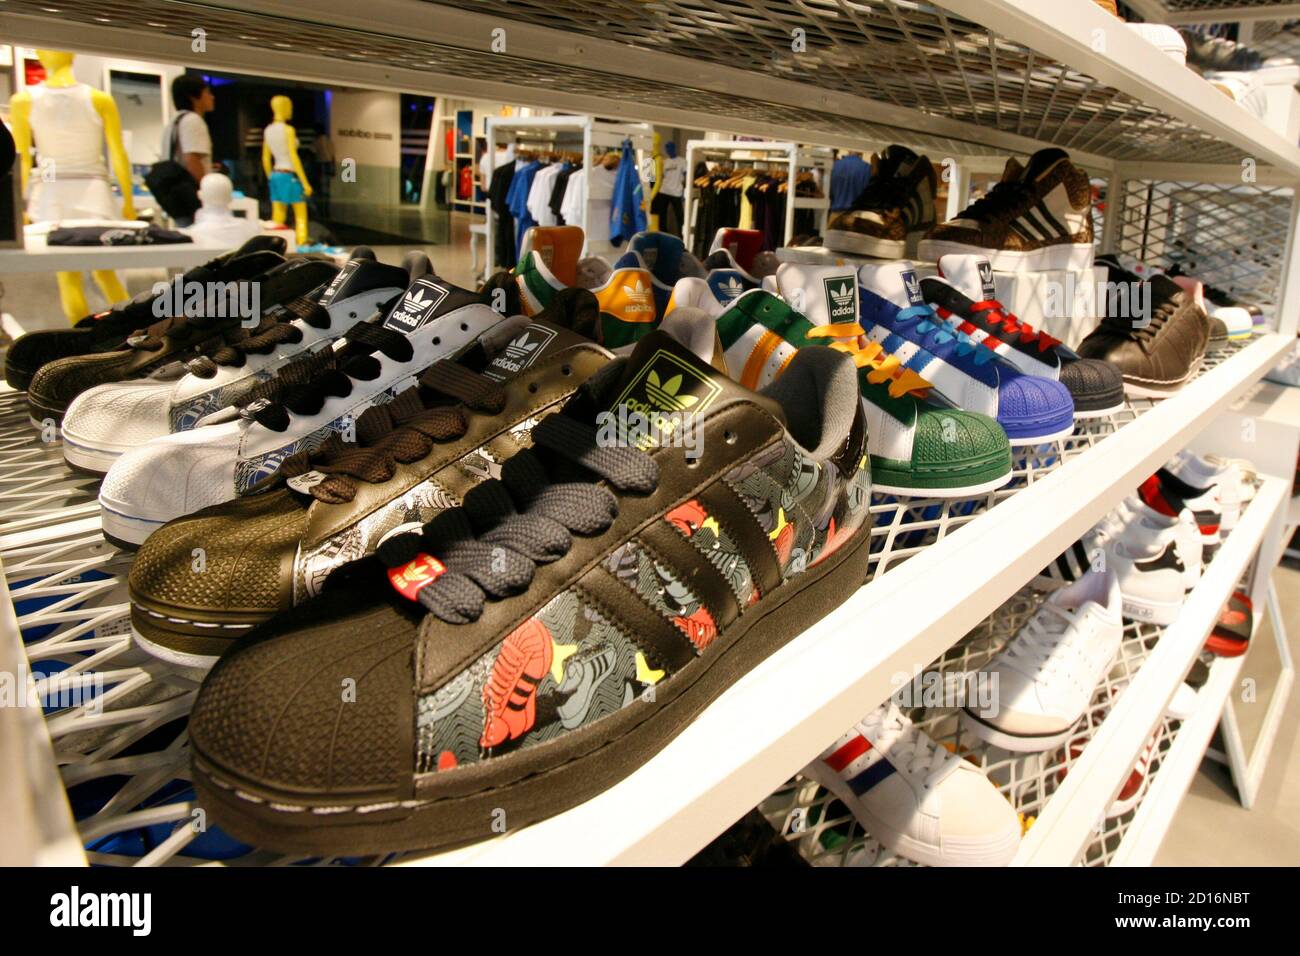 Shoes are displayed at the new and world's largest Adidas Brand Center store in Beijing July 3, 2008. Adidas will open world's largest Adidas store with a size of 3,170 square